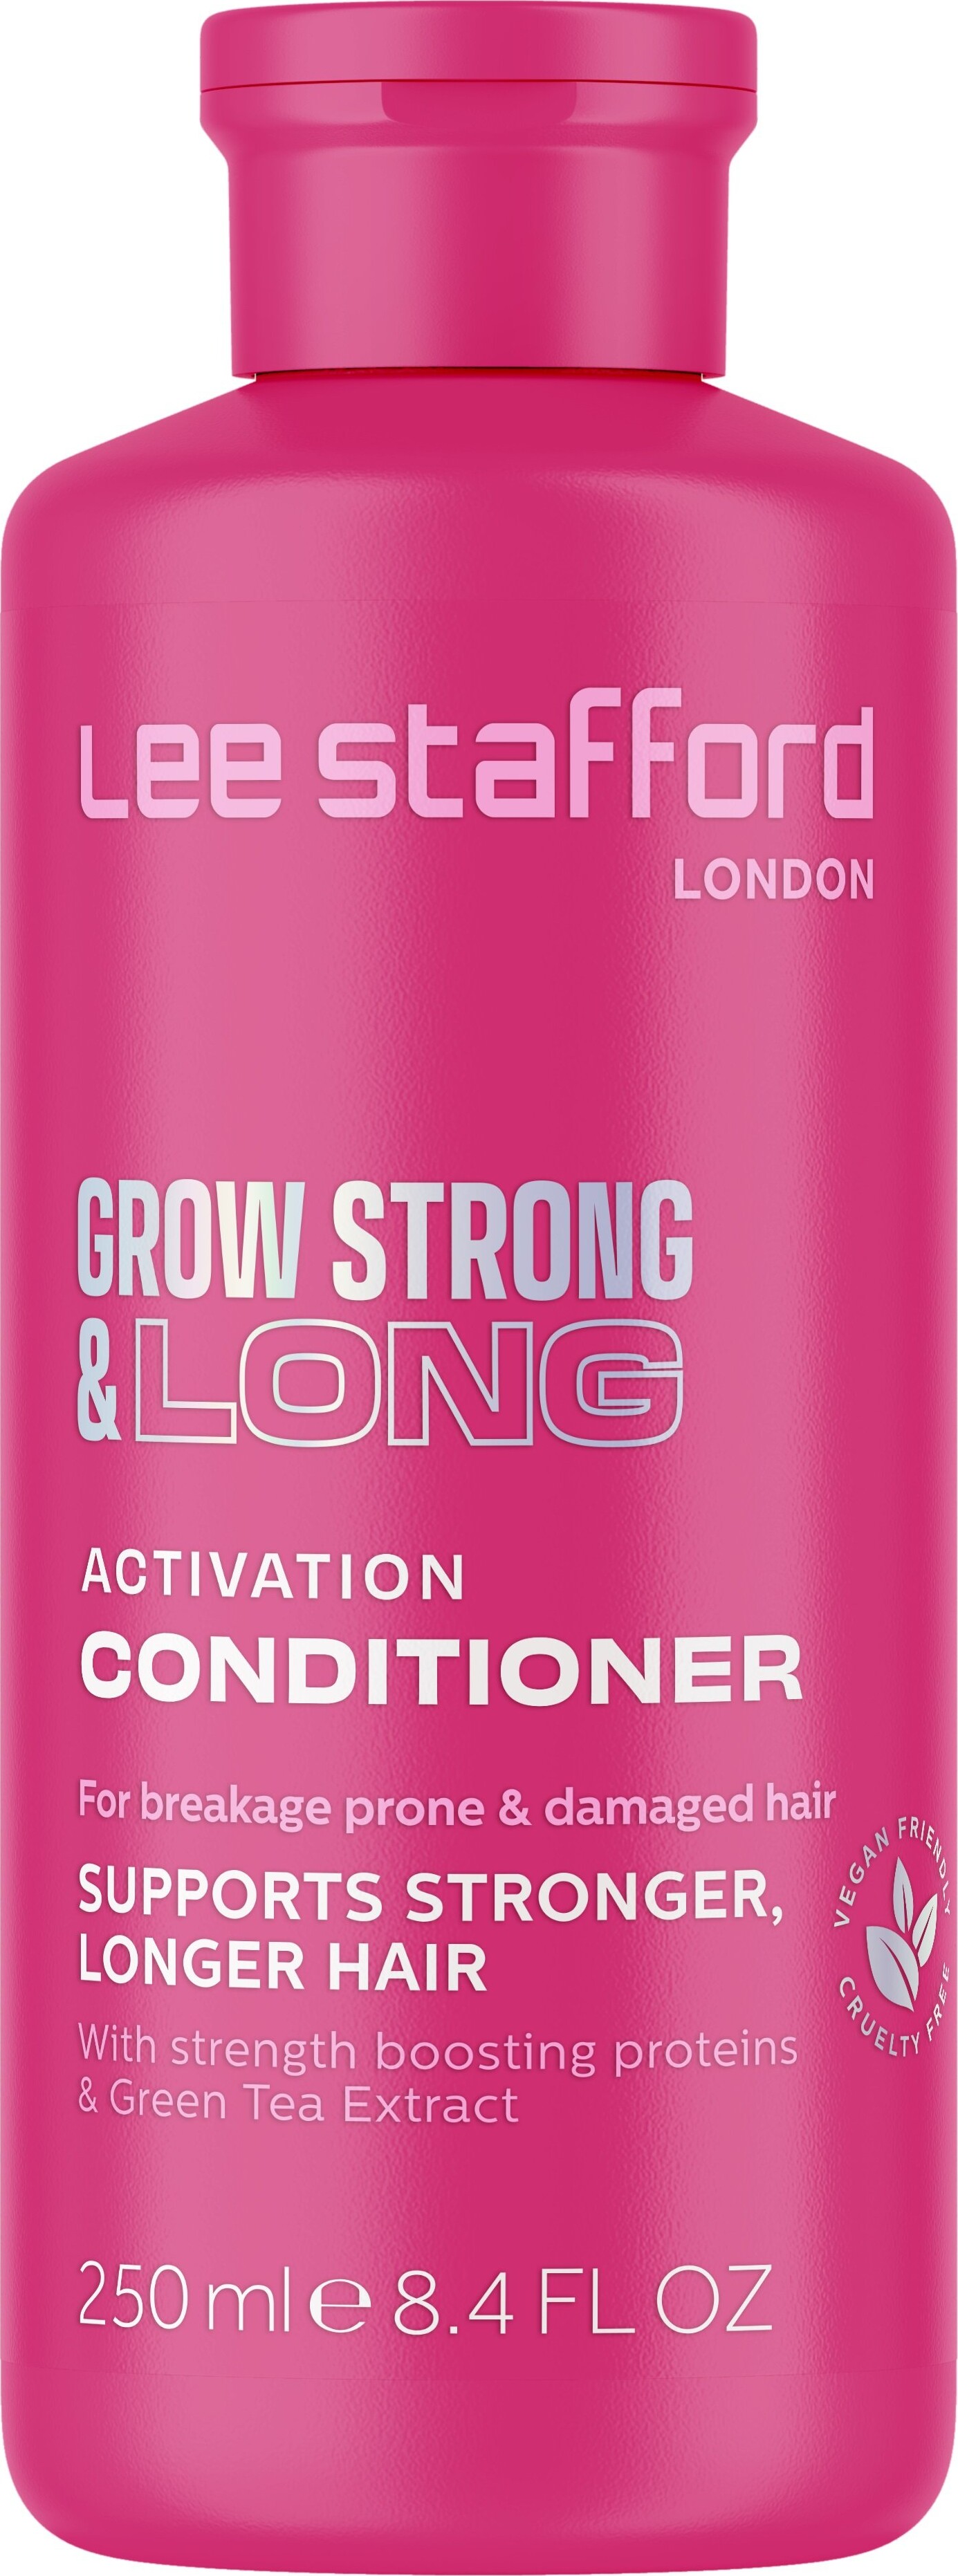 Se Lee Stafford - Grow Strong & Long Activation Conditioner - 250 Ml hos Gucca.dk